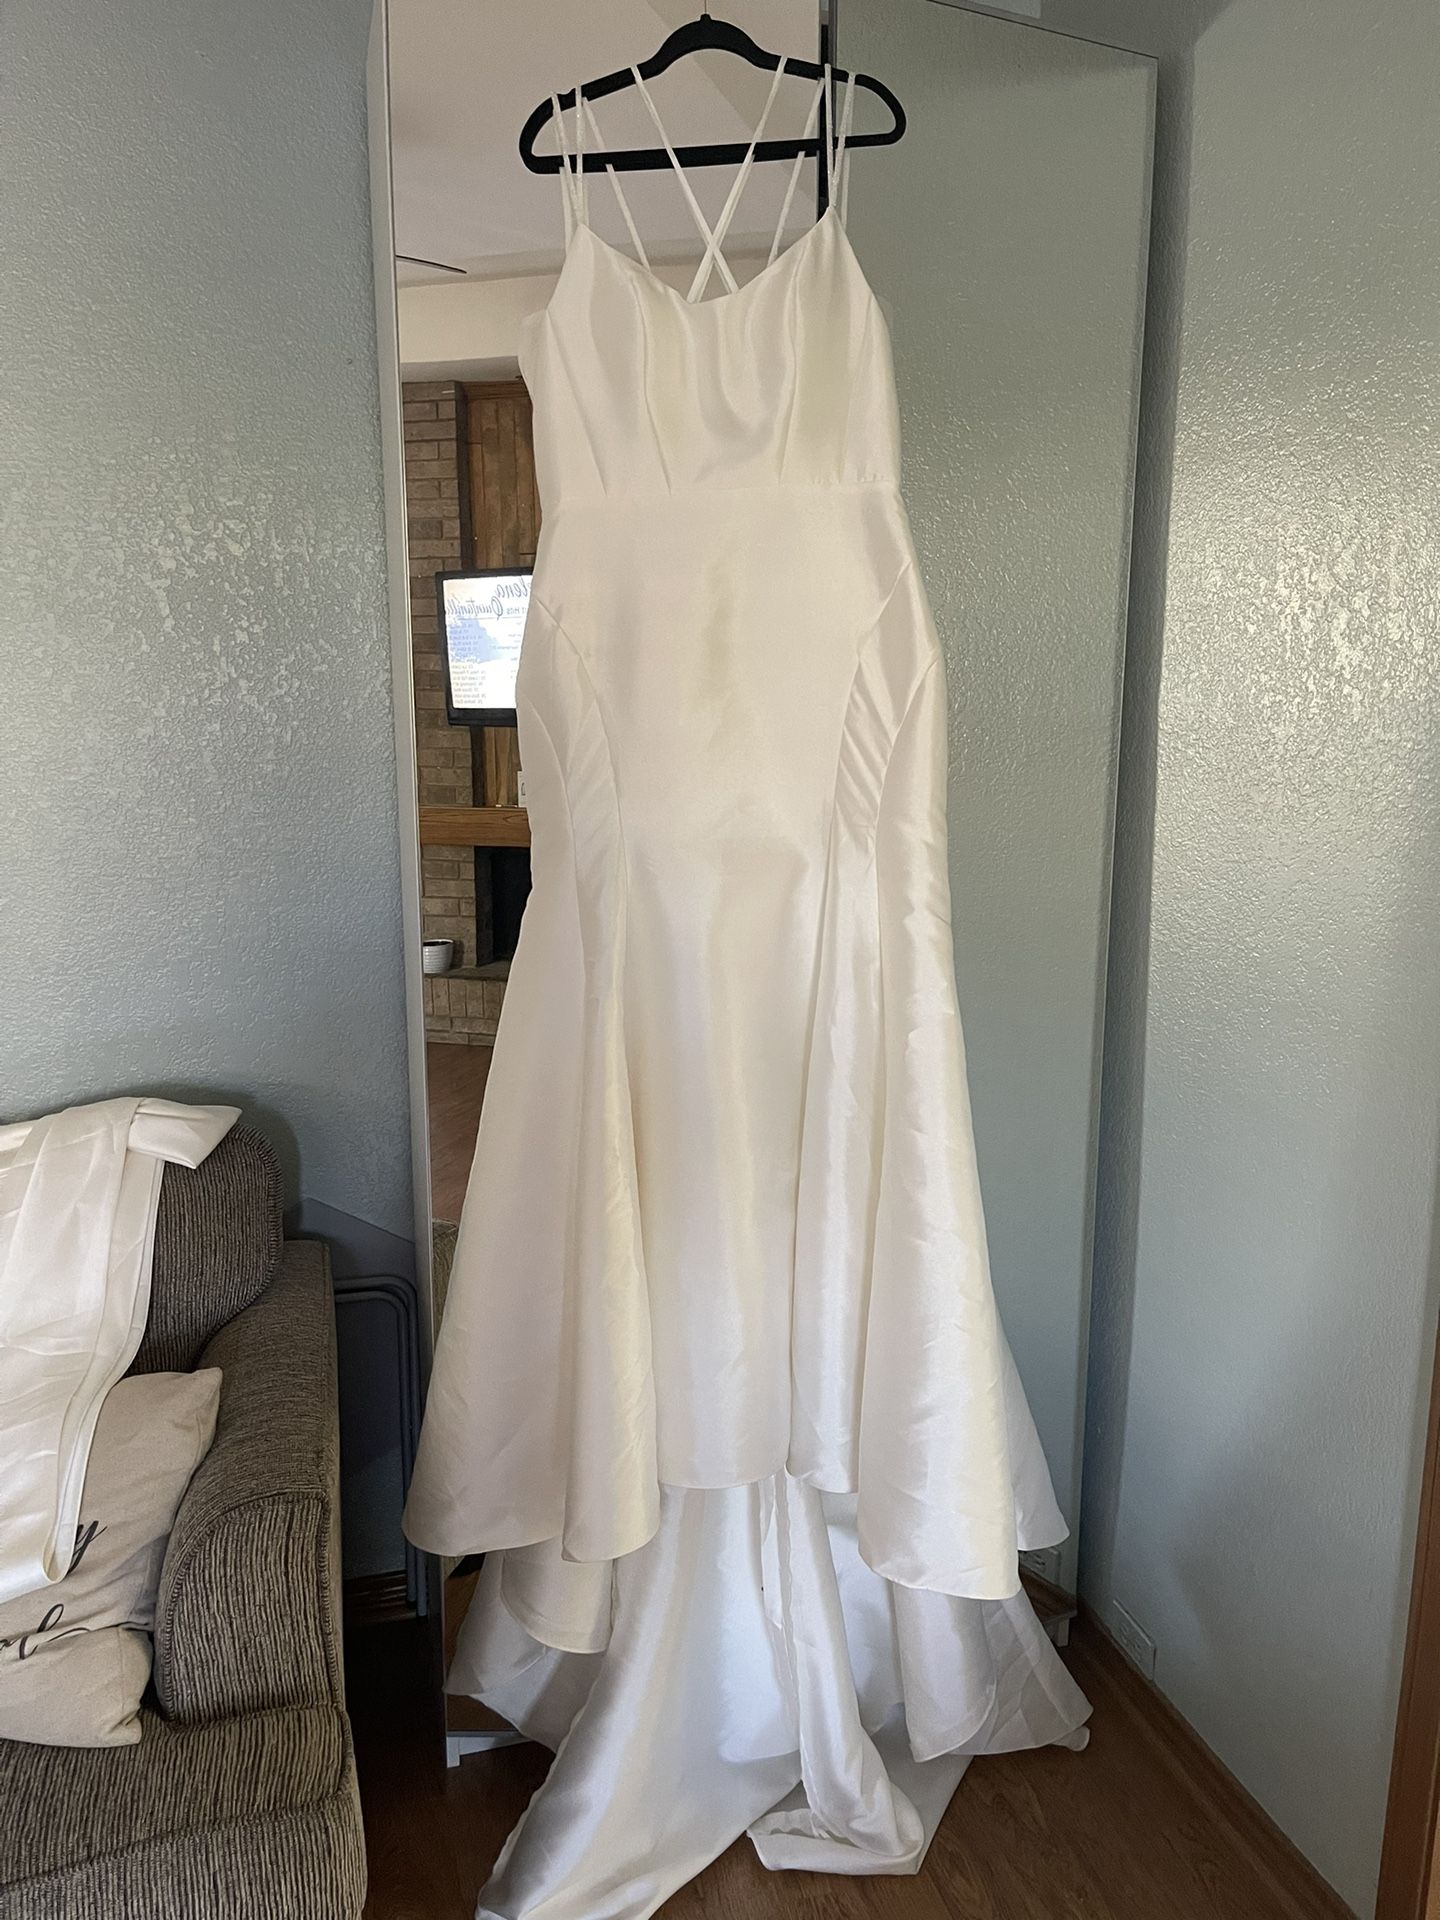 NEW Fit And Flare Wedding Dress Size 20 